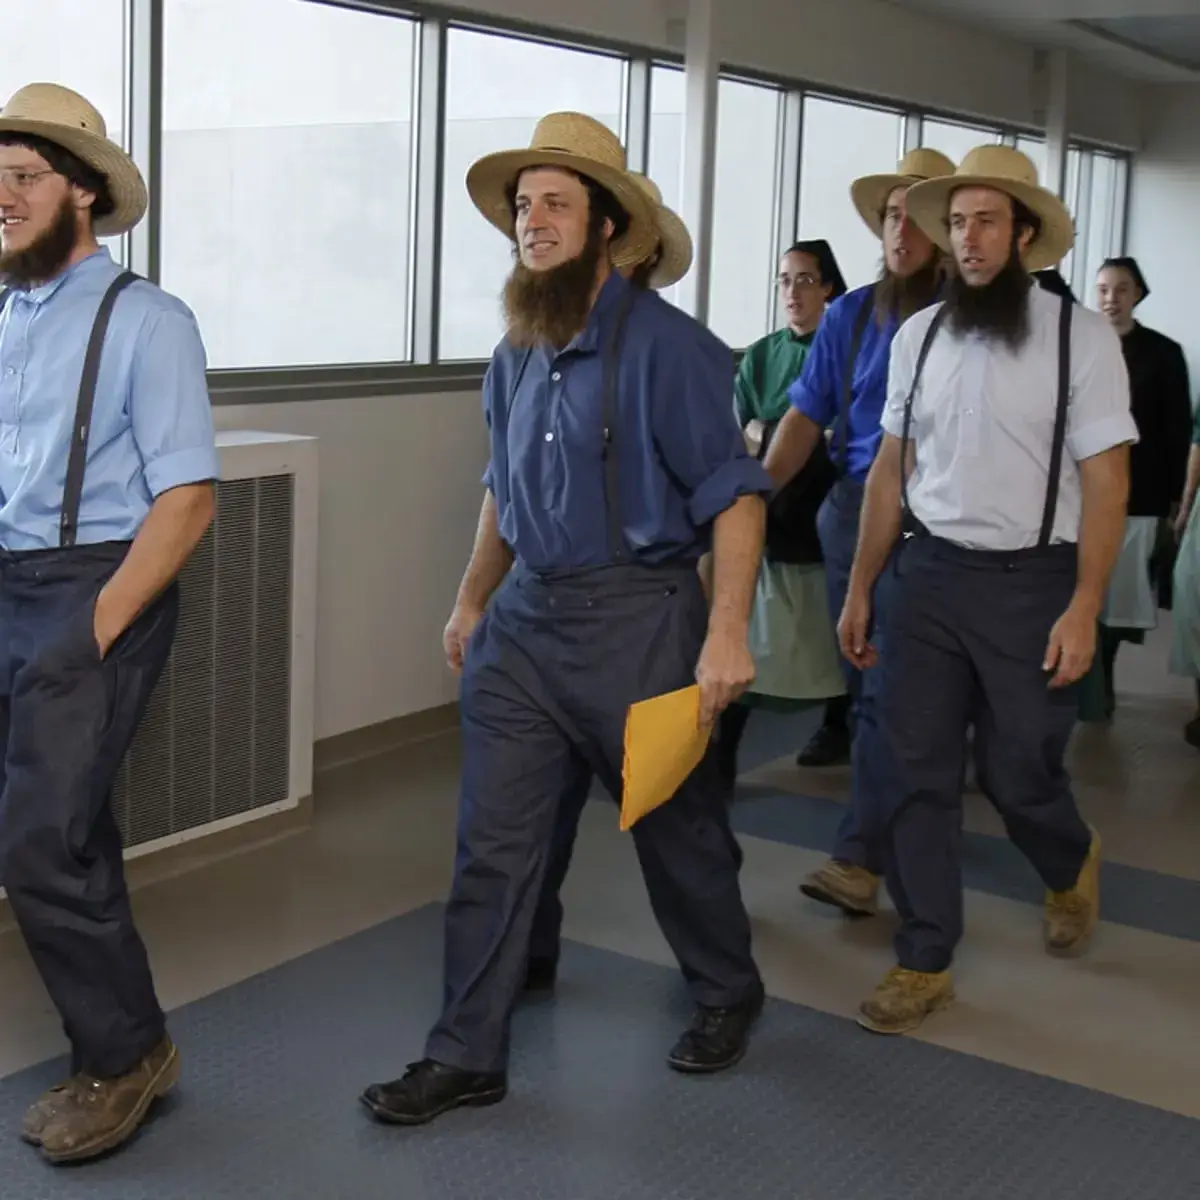 Amish Costumes For Men And Women